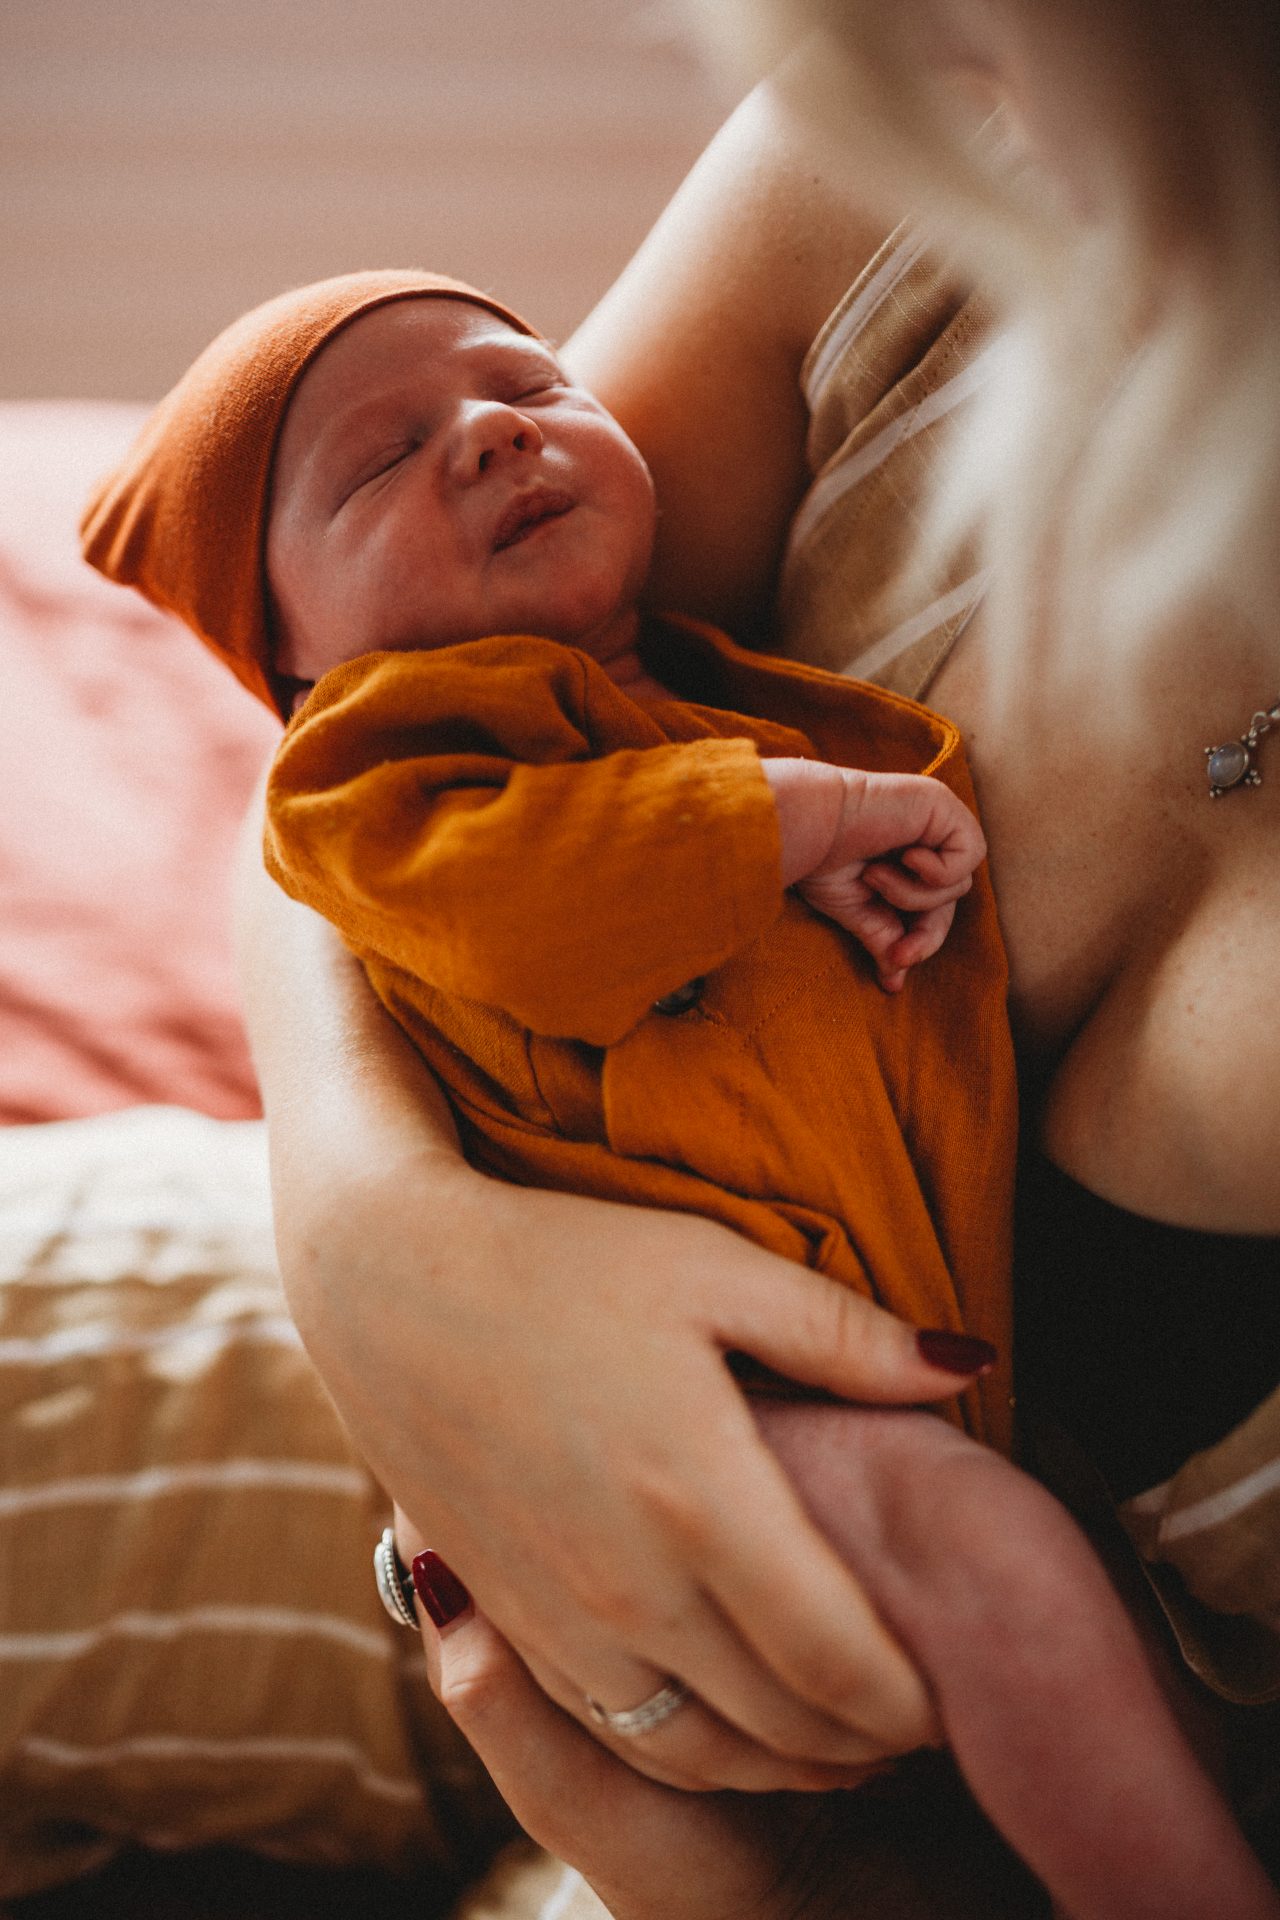 Newborn baby boy, dressed in orange beanie and onesie, cradled in his mother's arms